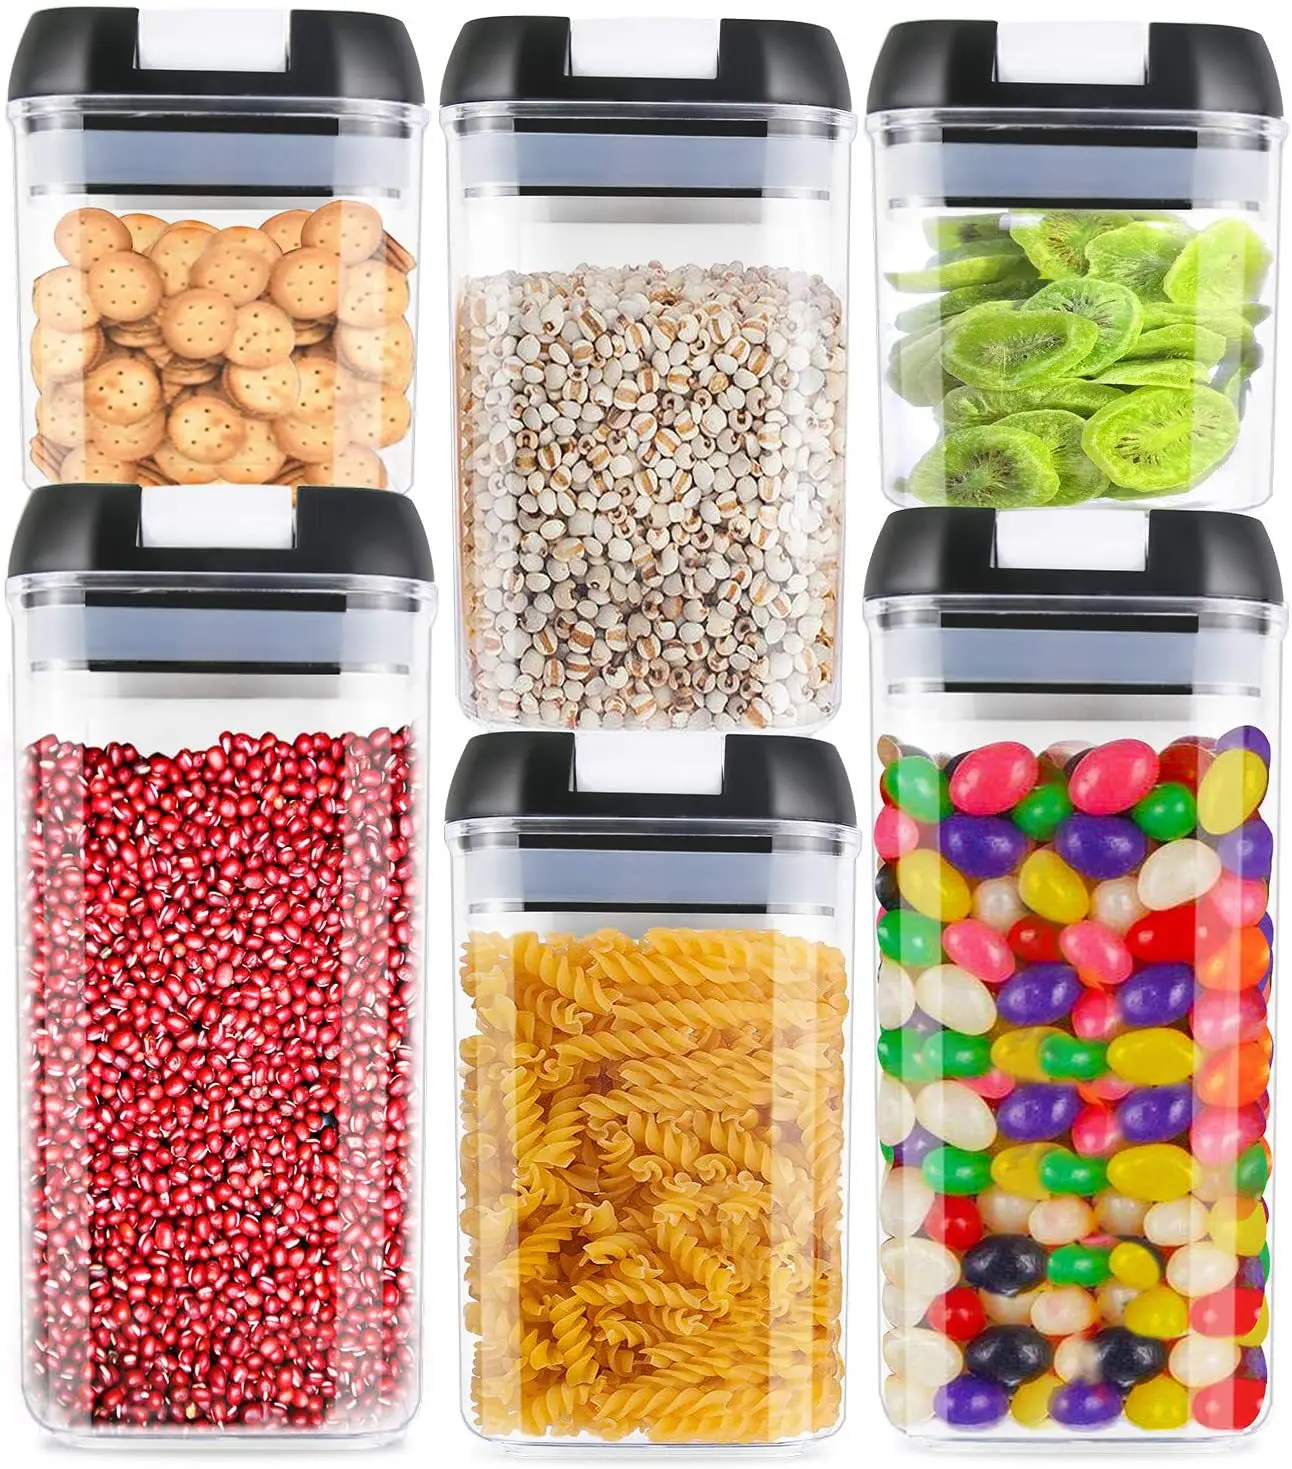 PRAKI Airtight Food Storage Container Set, 16 Pcs BPA Free Plastic Dry Food  Canisters for Kitchen Pantry Organization and Storage Ideal for Cereal